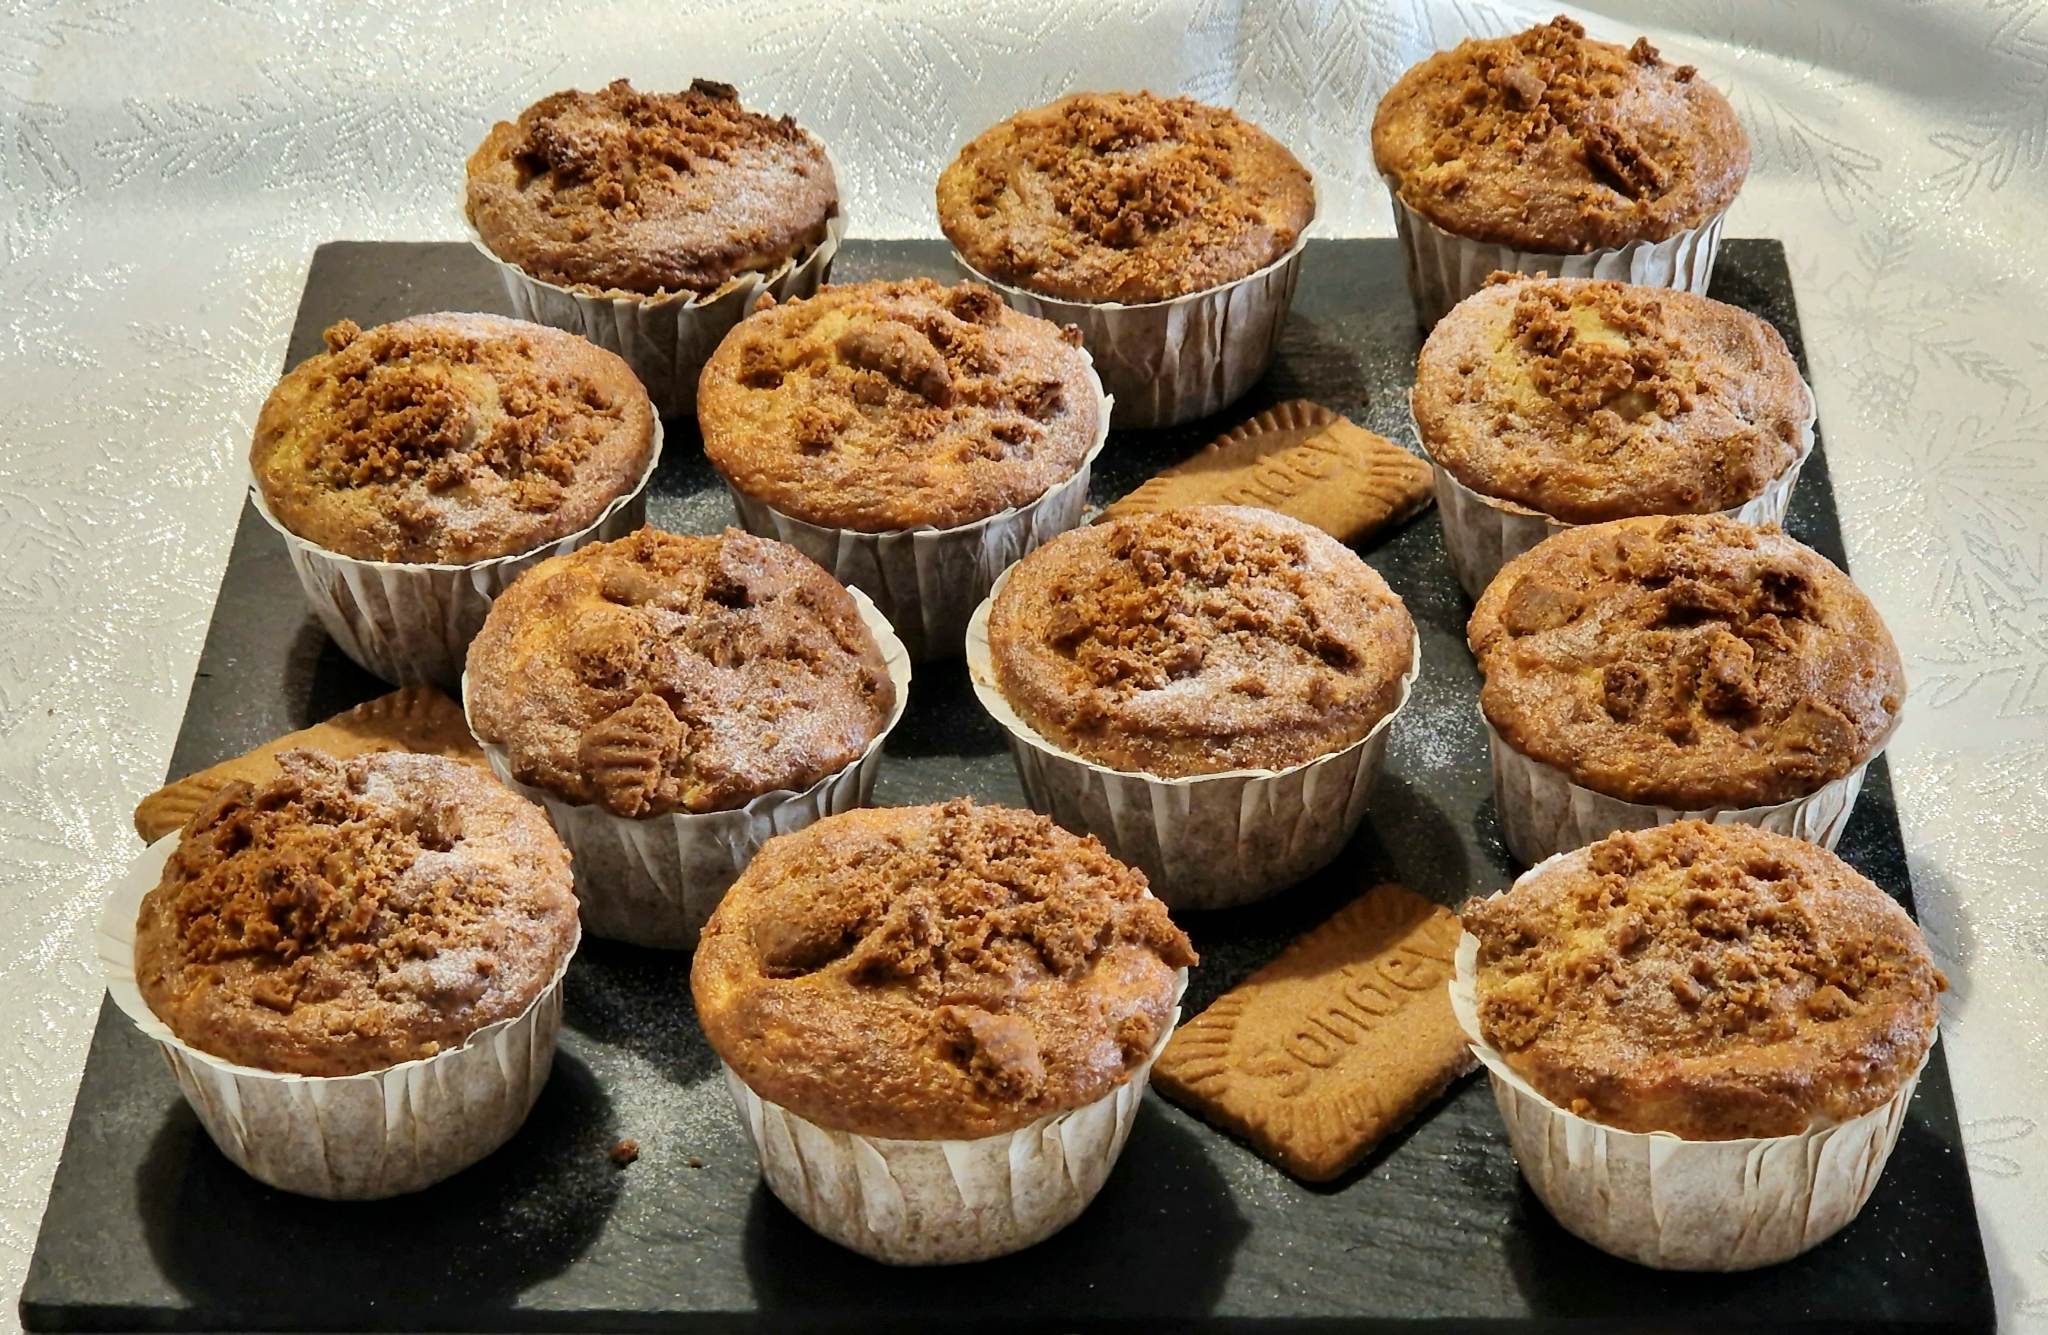 Muffins-Pommes-Speculoos